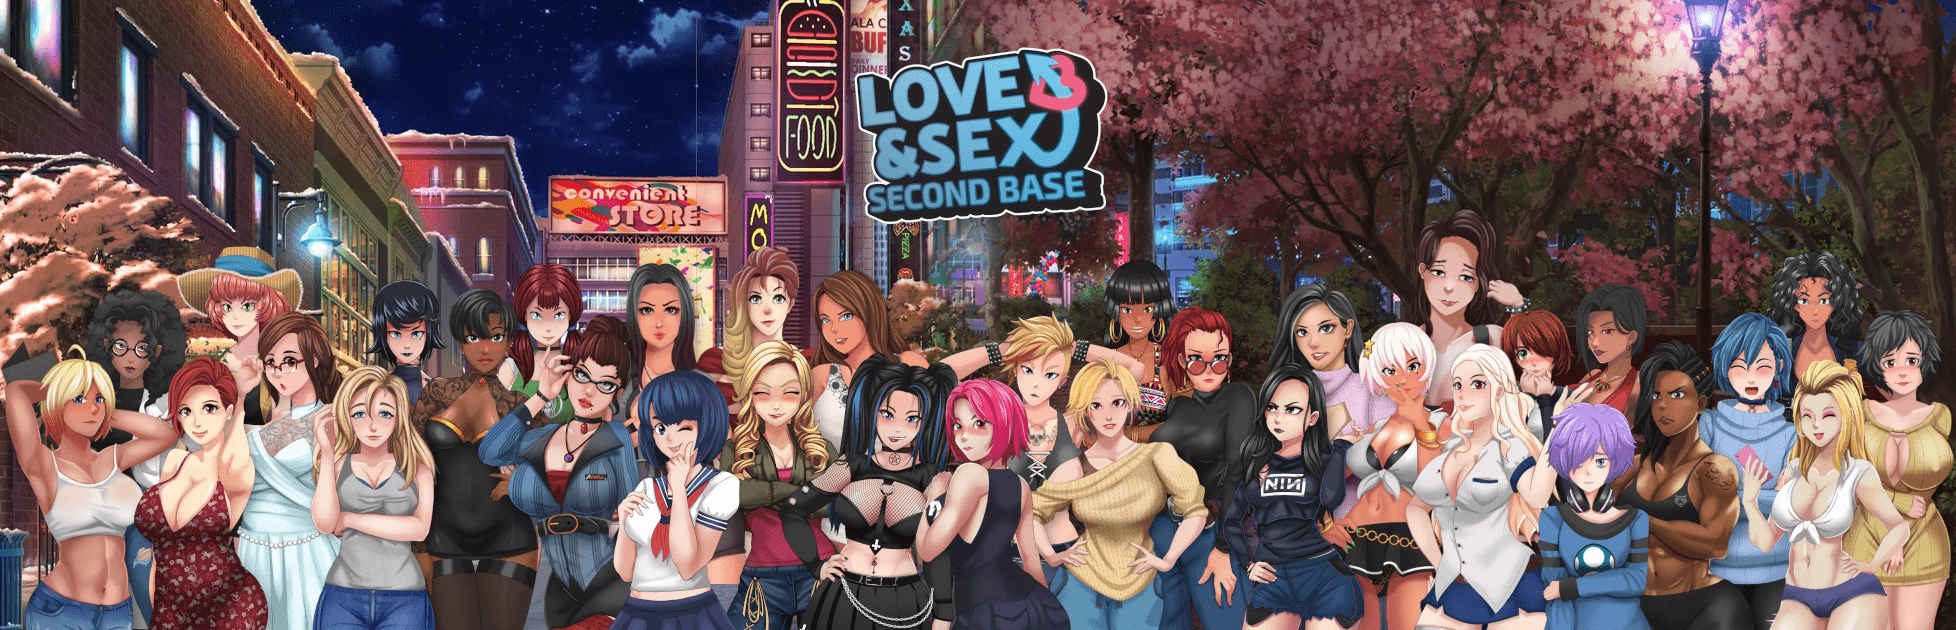 Love and sex second base